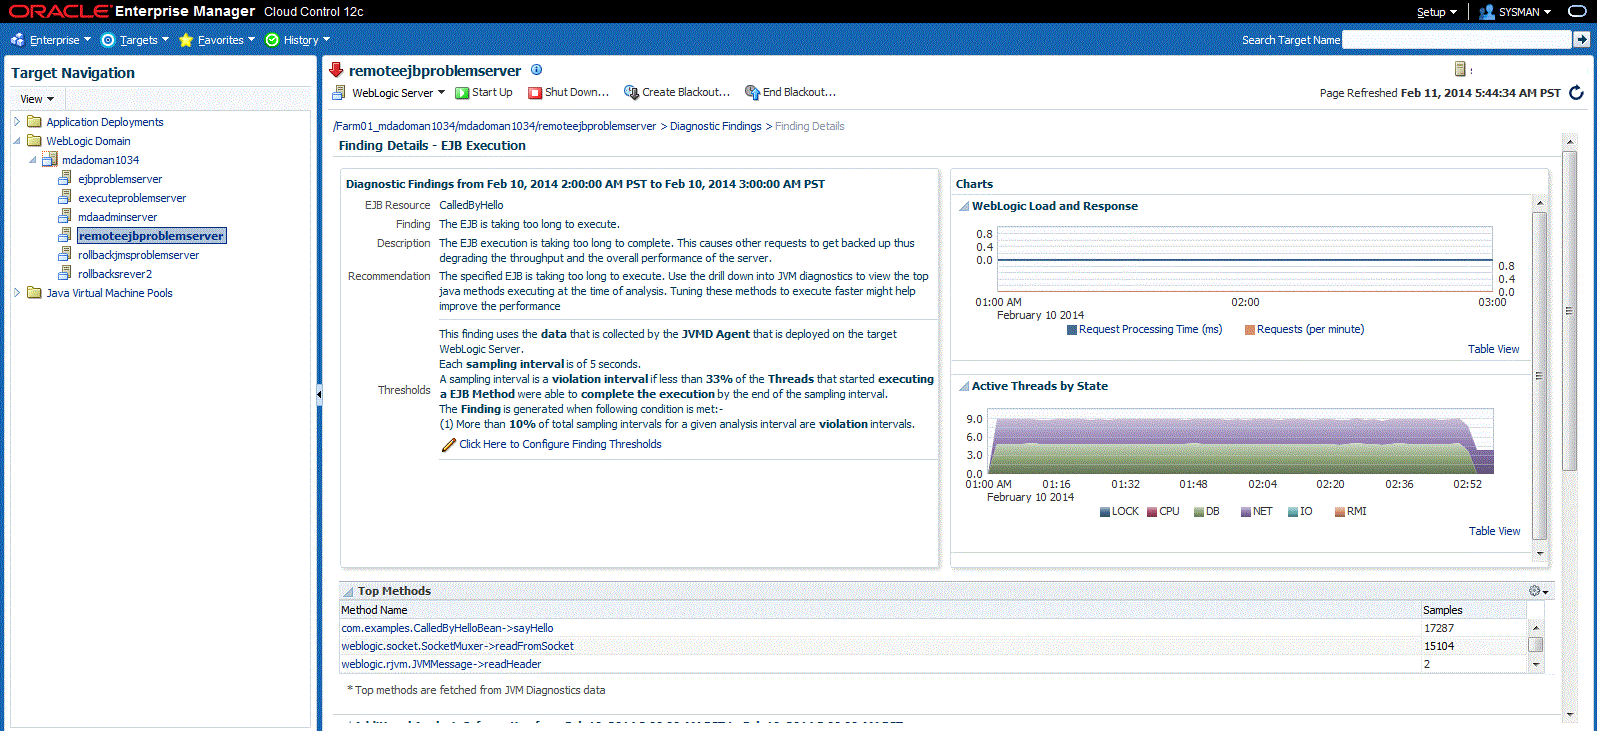 Finding Details page for EJB Execution